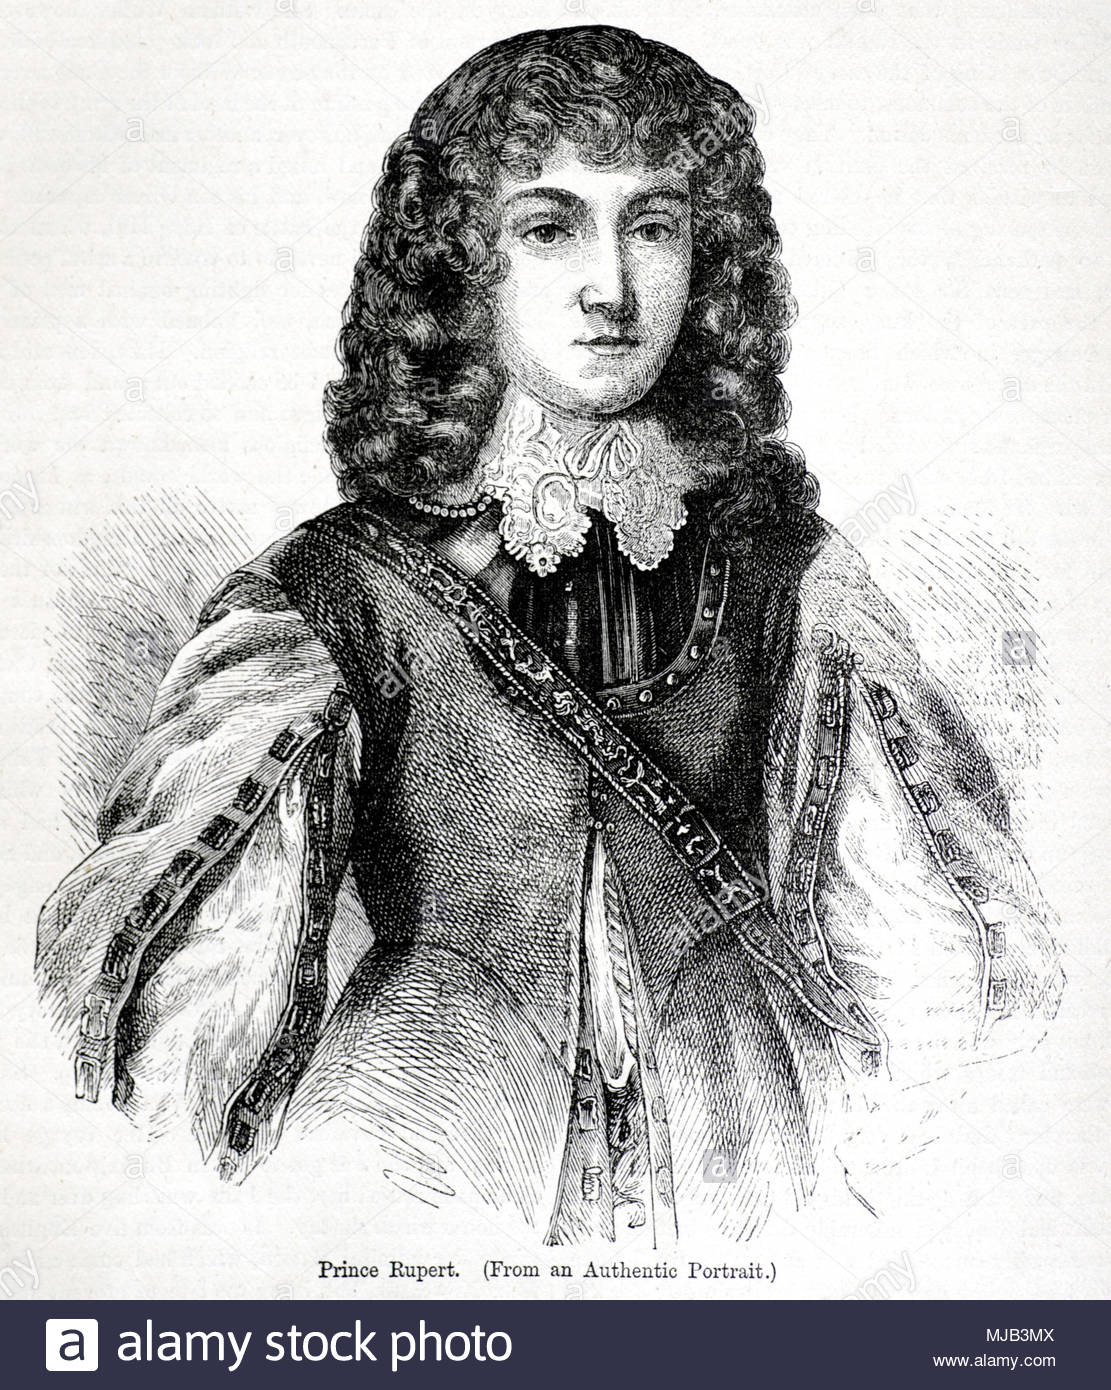 Prince Rupert of the Rhine, Duke of Cumberland 1619 – 1682 was a German soldier, admiral, scientist, colonial governor during the 17th century. He first came to prominence as a Cavalier cavalry commander during the English Civil War, antique illustration circa 1880 Stock Photo